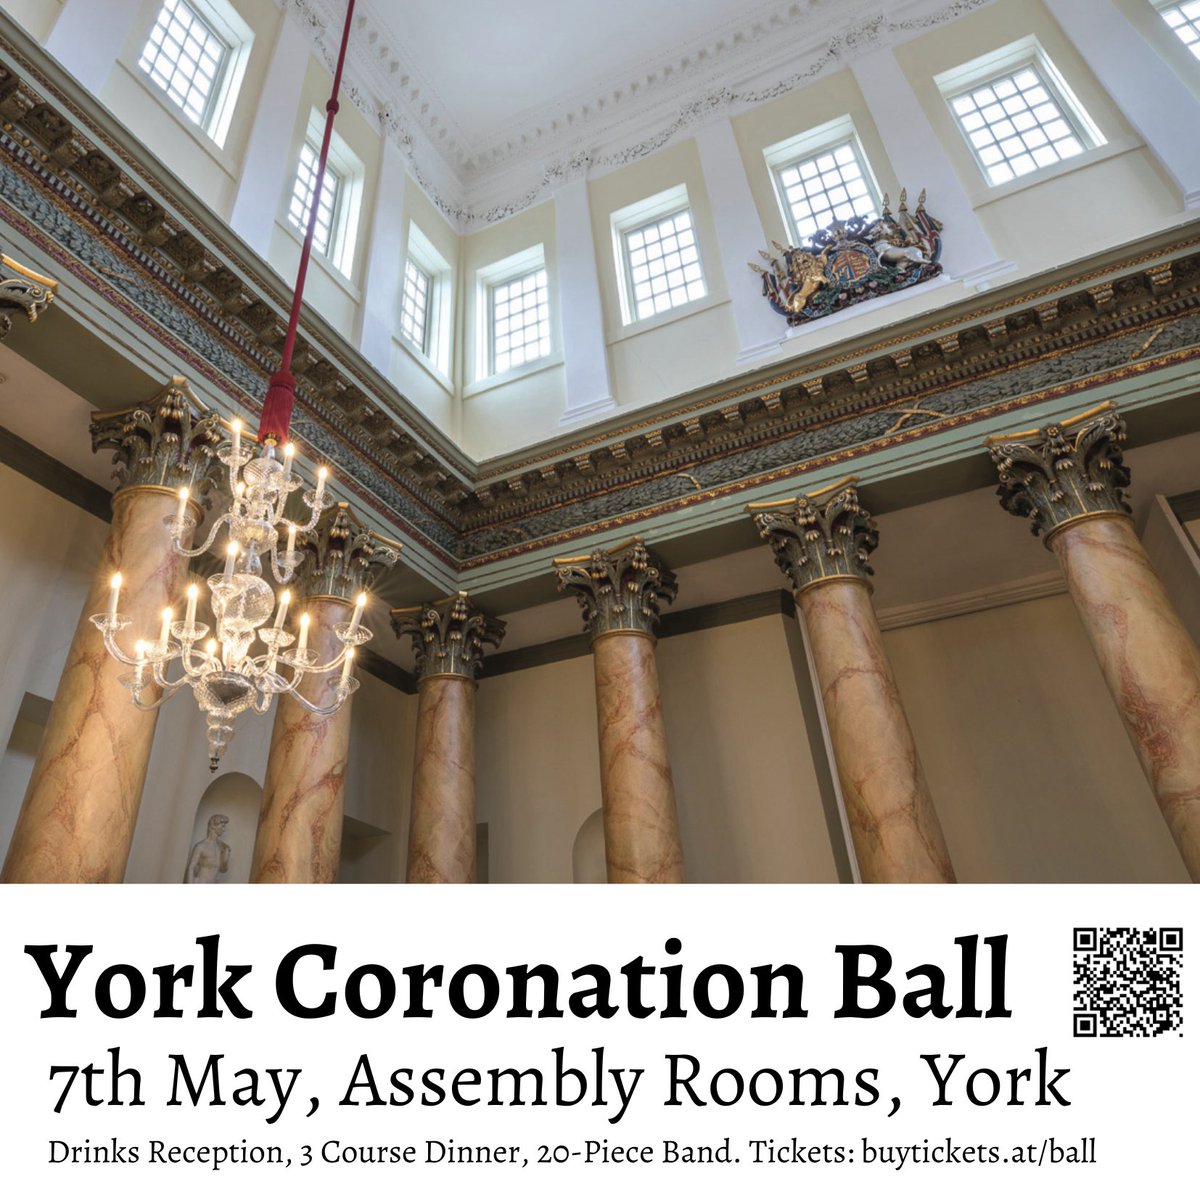 The Sheriff’s #YorkCoronationBall will be supporting her Cost of Living Appeal with @TwoRidingsCF - limited tickets are still available for this once in a generation event! It promises to be very special 🍾👑🎼 tickettailor.com/events/ball/85…